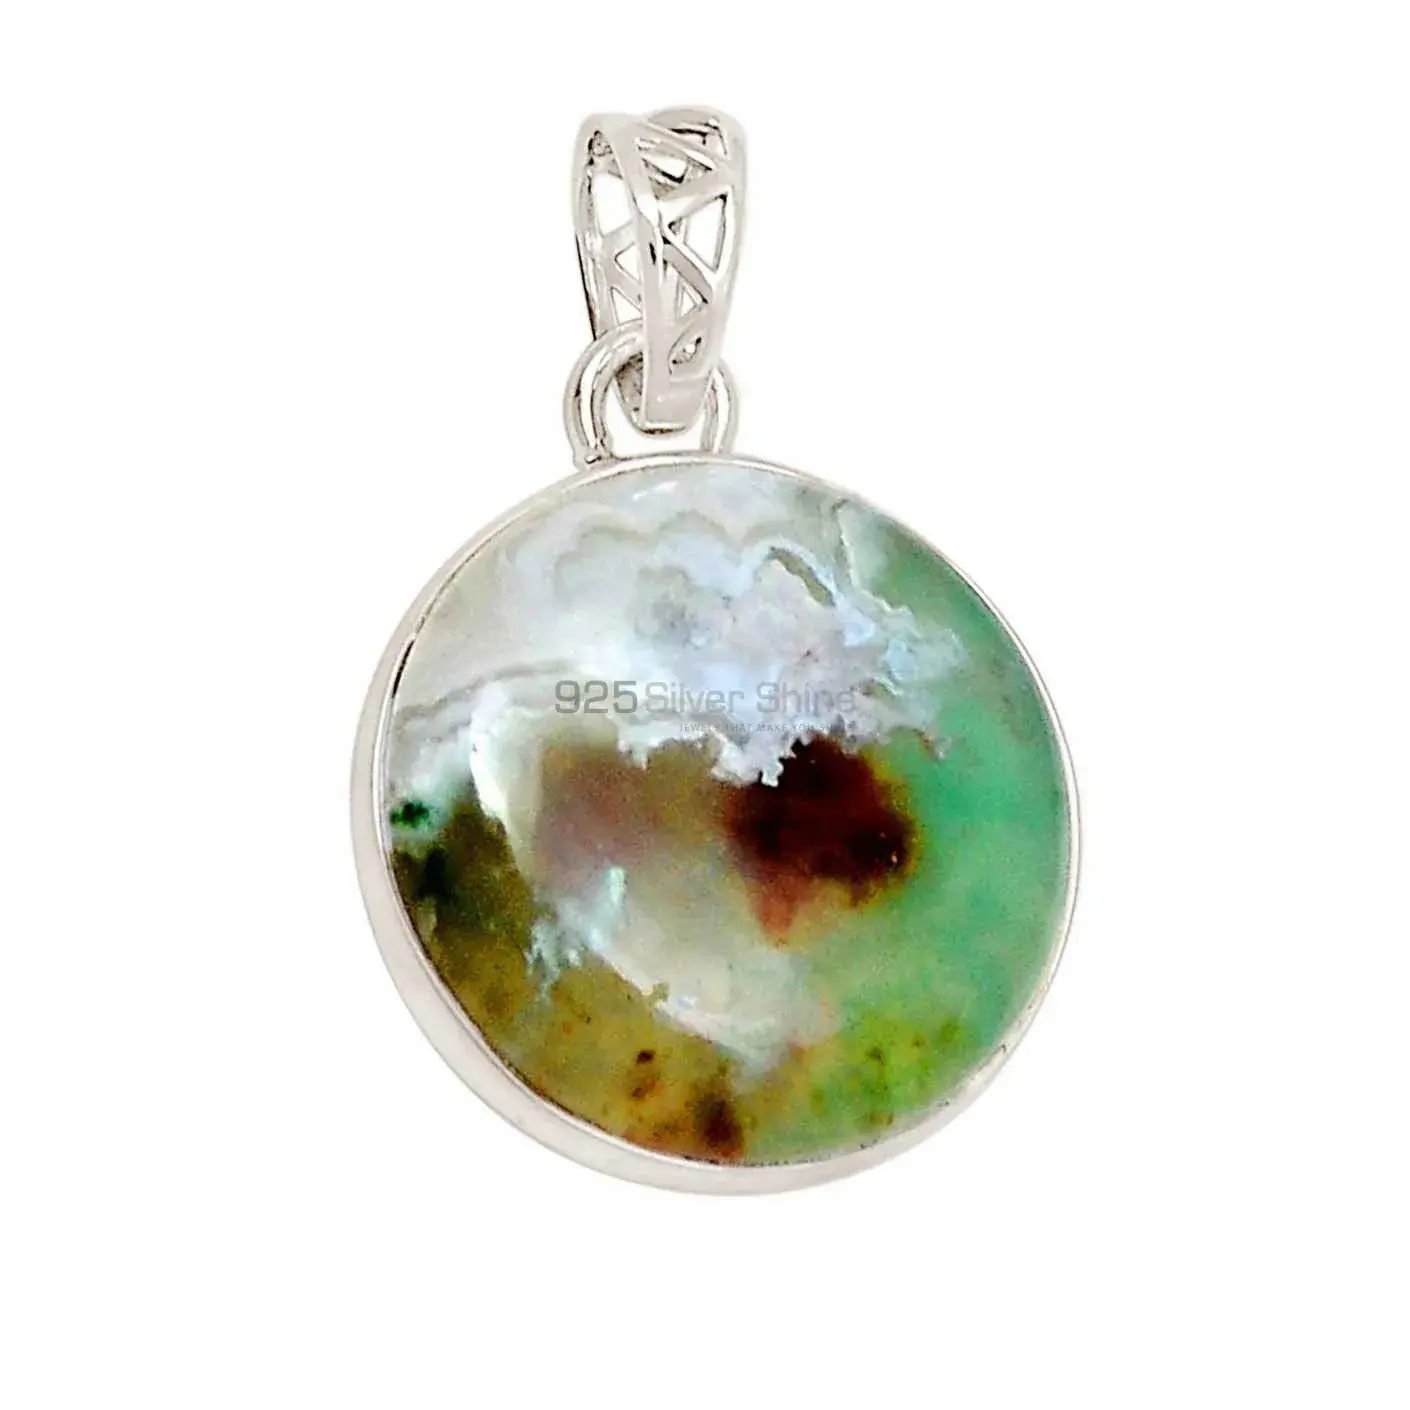 High Quality 925 Fine Silver Pendants Suppliers In Chrysoprase Gemstone Jewelry 925SP195_7